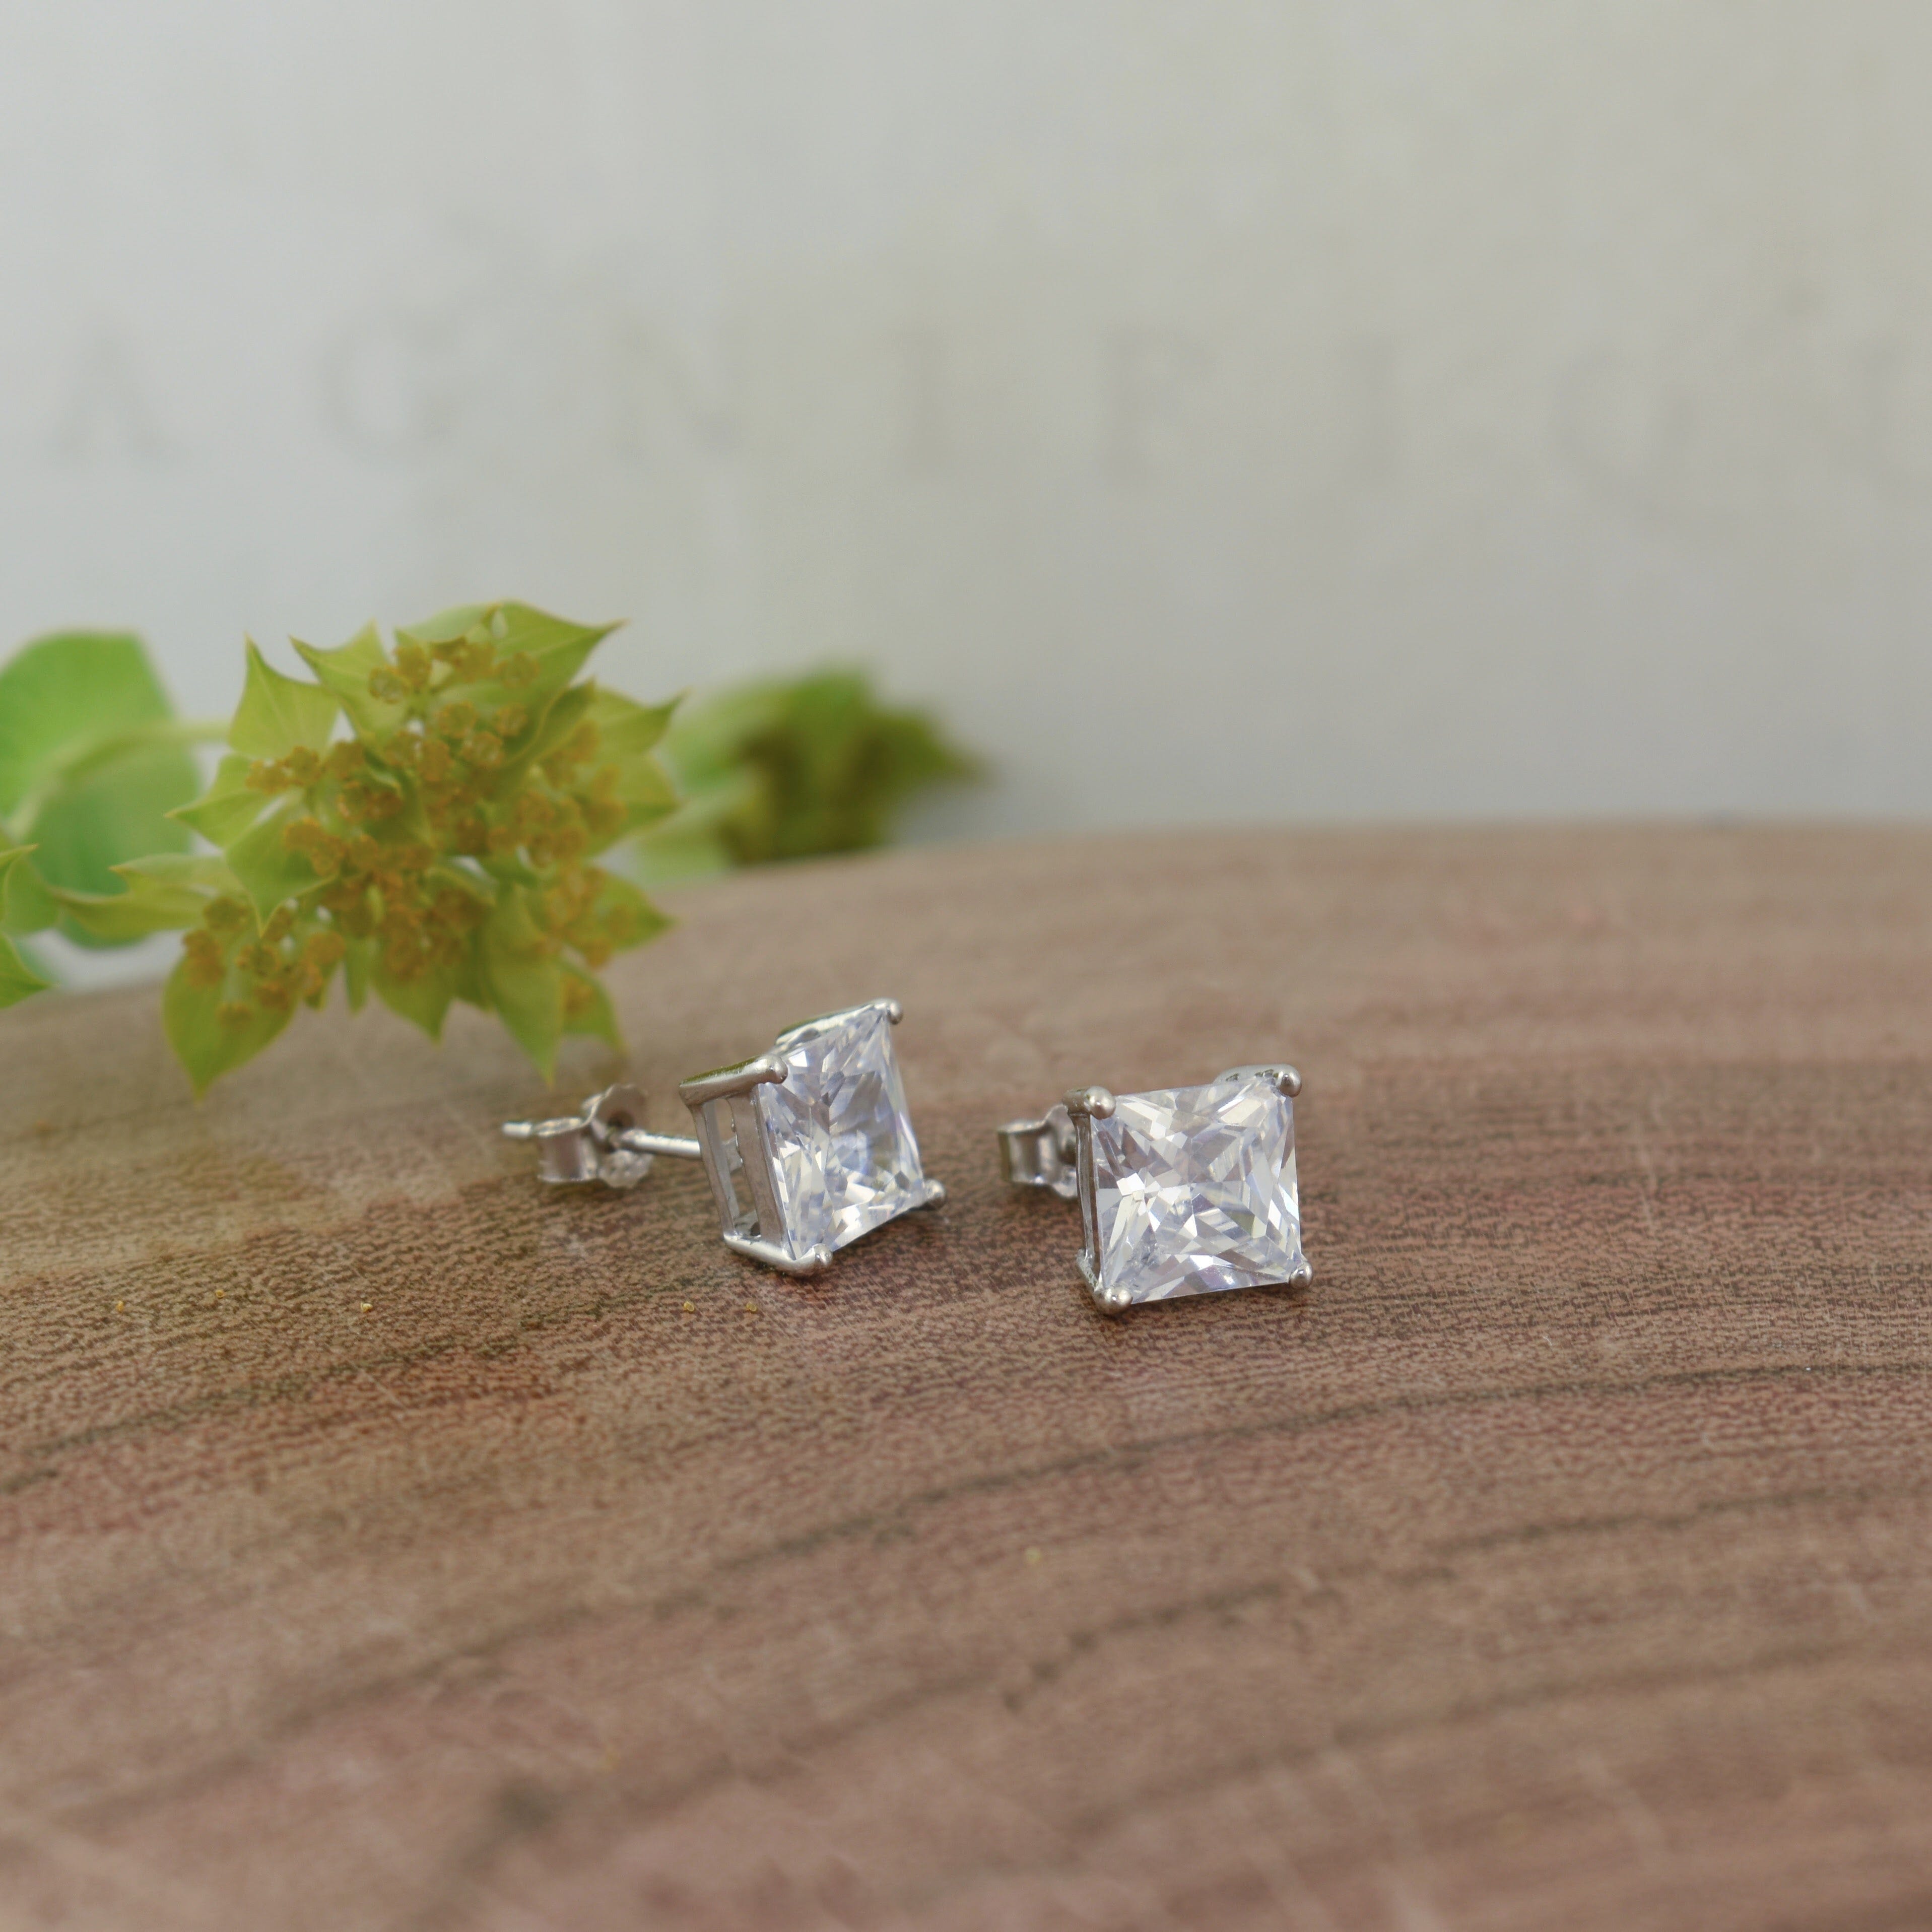 .925 sterling silver and princess cut earrings